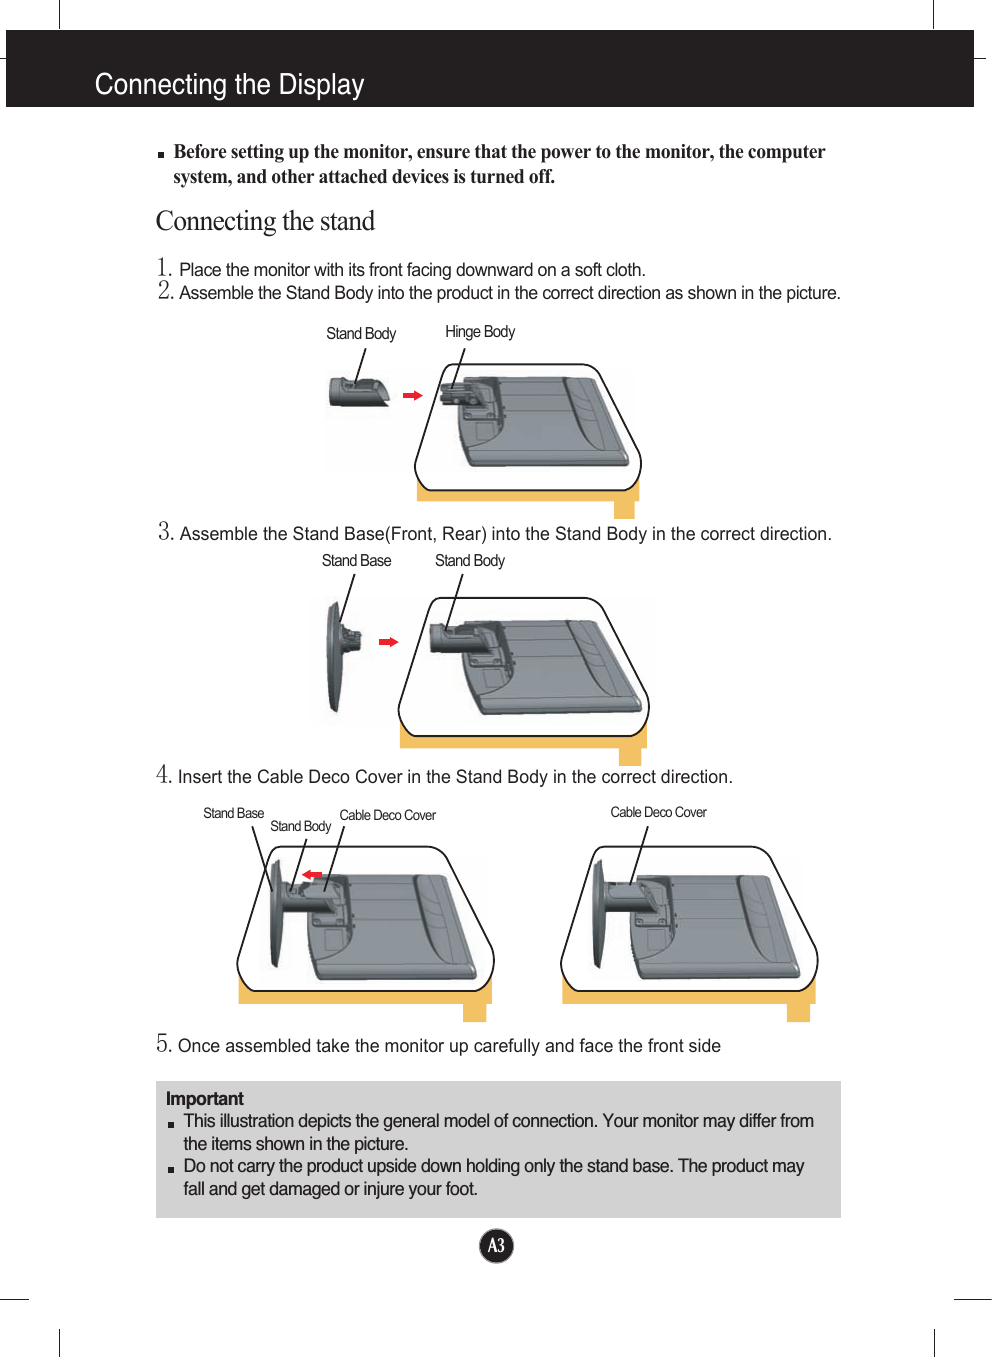 Before setting up the monitor, ensure that the power to the monitor, the computersystem, and other attached devices is turned off.Connecting the stand 1.Place the monitor with its front facing downward on a soft cloth.2.Assemble the Stand Body into the product in the correct direction as shown in the picture. 3.Assemble the Stand Base(Front, Rear) into the Stand Body in the correct direction.Stand BodyStand BaseStand Body Hinge Body5.Once assembled take the monitor up carefully and face the front side4.Insert the Cable Deco Cover in the Stand Body in the correct direction.Stand BodyStand BaseCable Deco CoverCable Deco CoverA3Connecting the DisplayImportantThis illustration depicts the general model of connection. Your monitor may differ fromthe items shown in the picture.Do not carry the product upside down holding only the stand base. The product mayfall and get damaged or injure your foot.